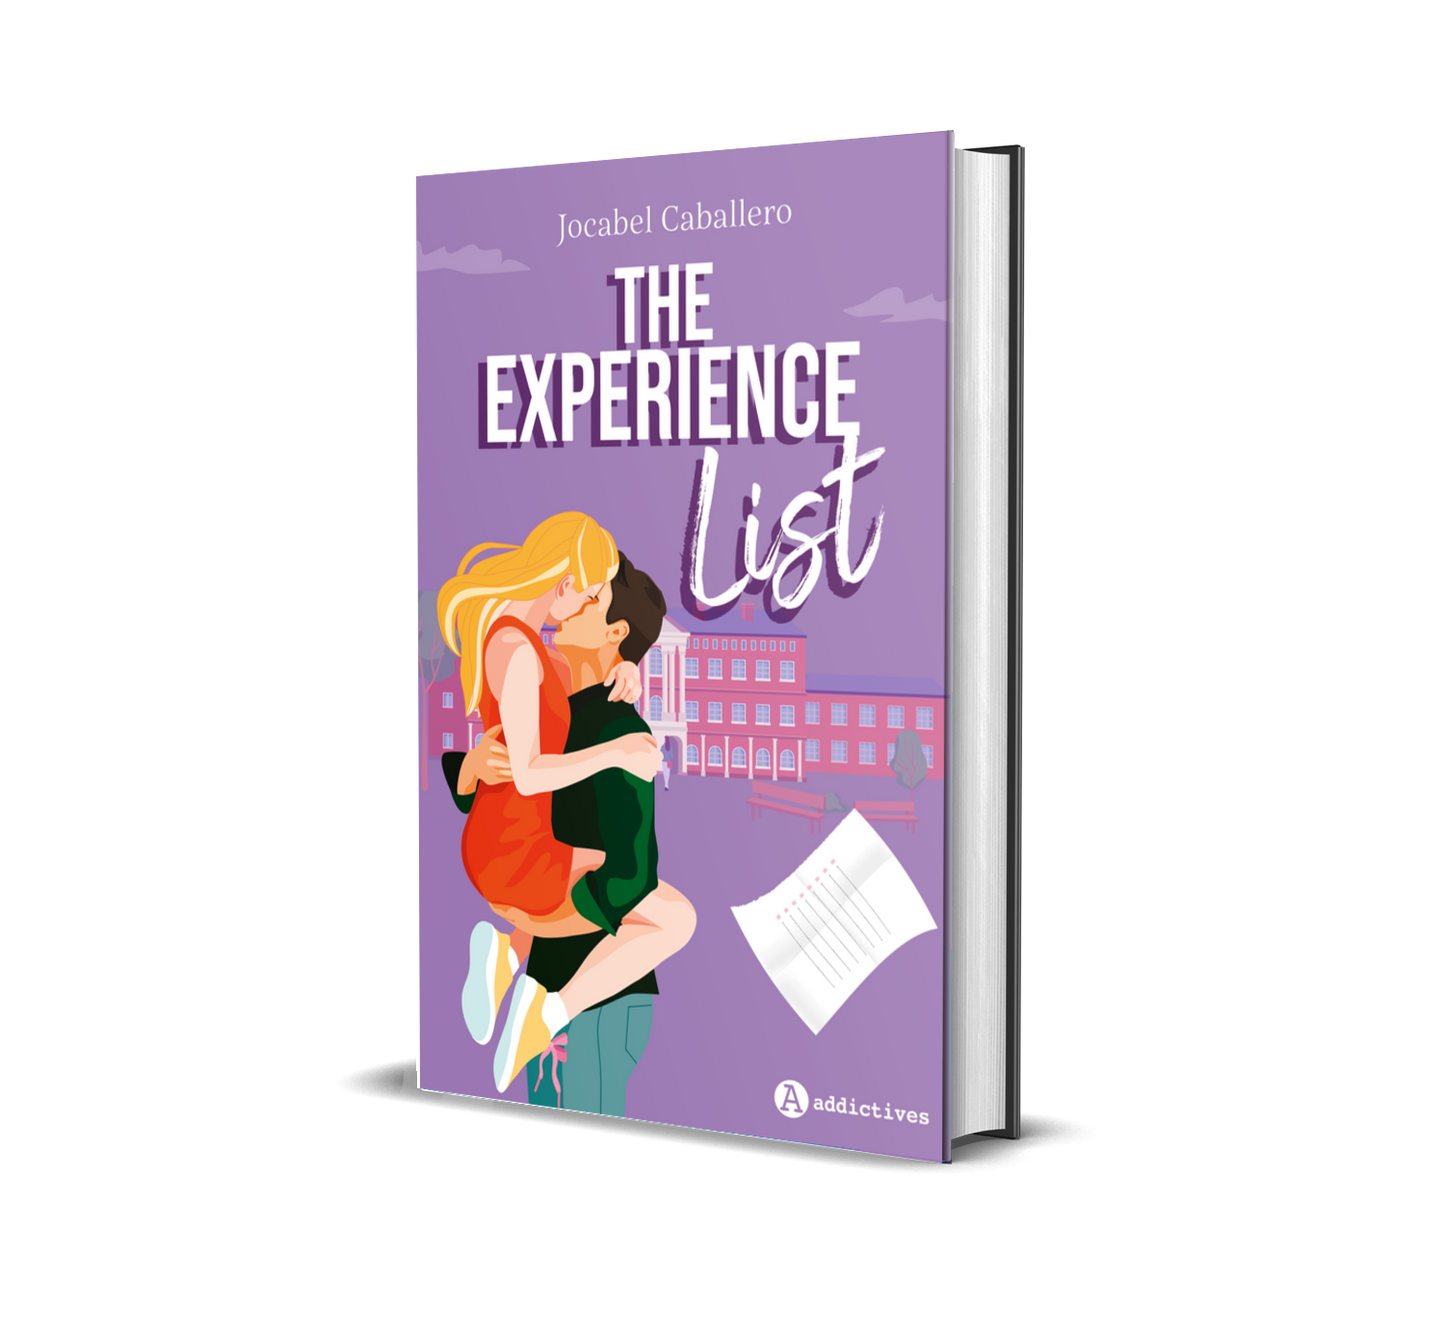 The experience list